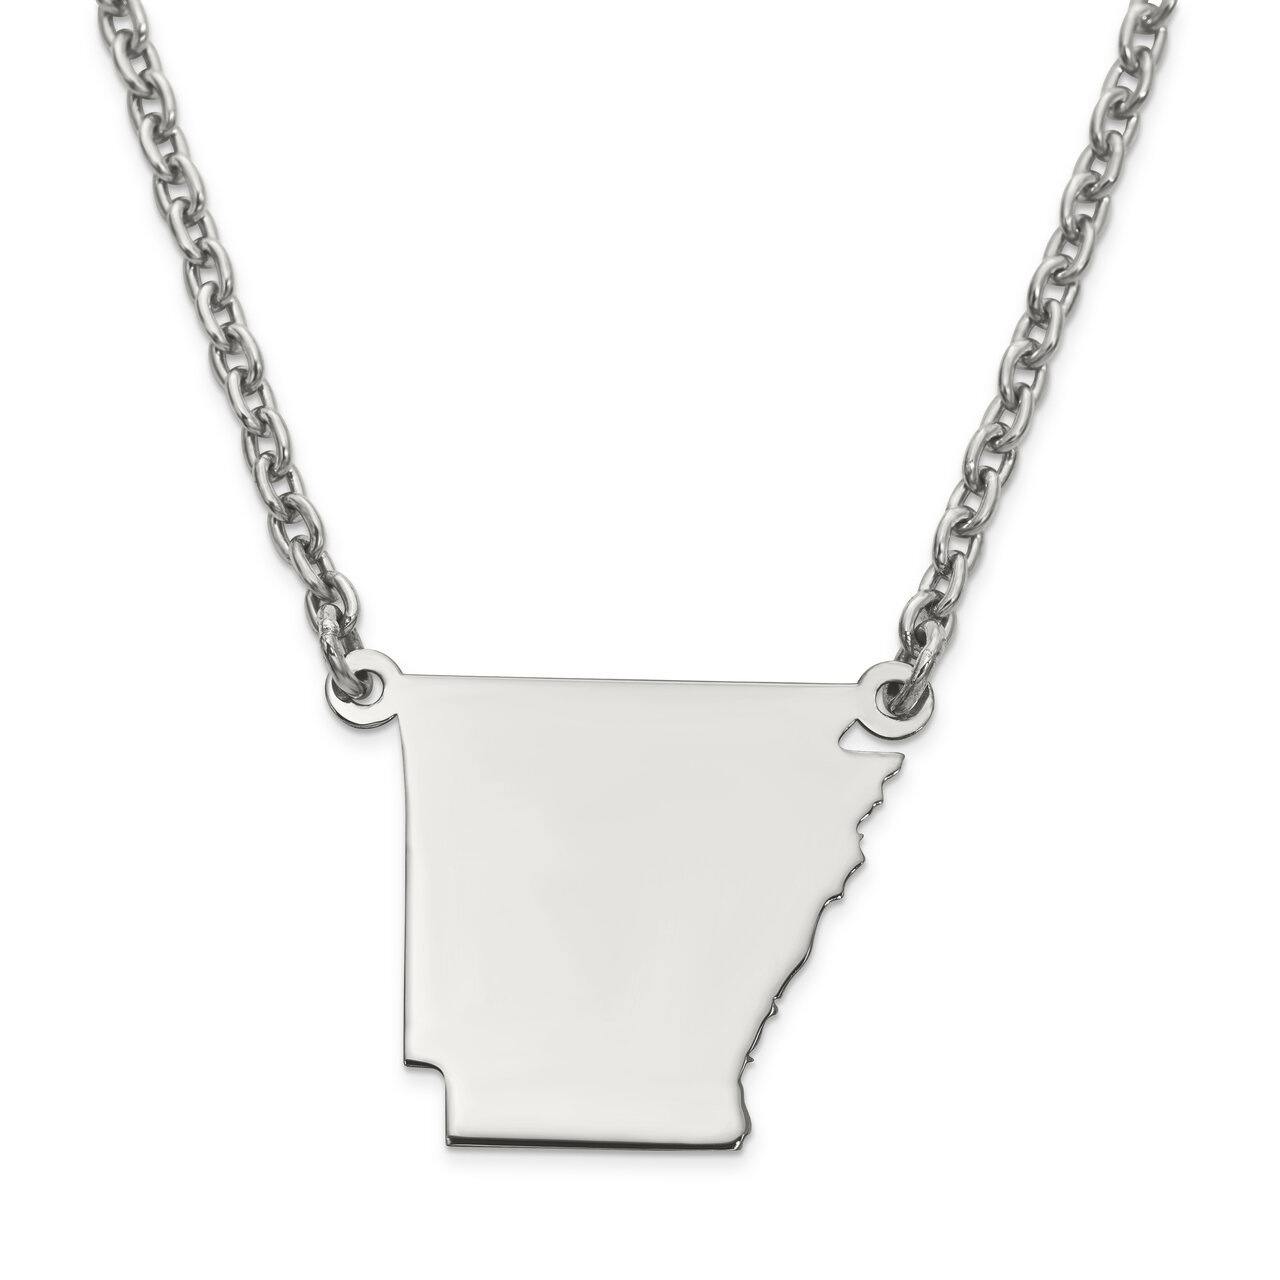 Arkansas State Pendant Necklace with Chain Sterling Silver Engravable XNA706SS-AR